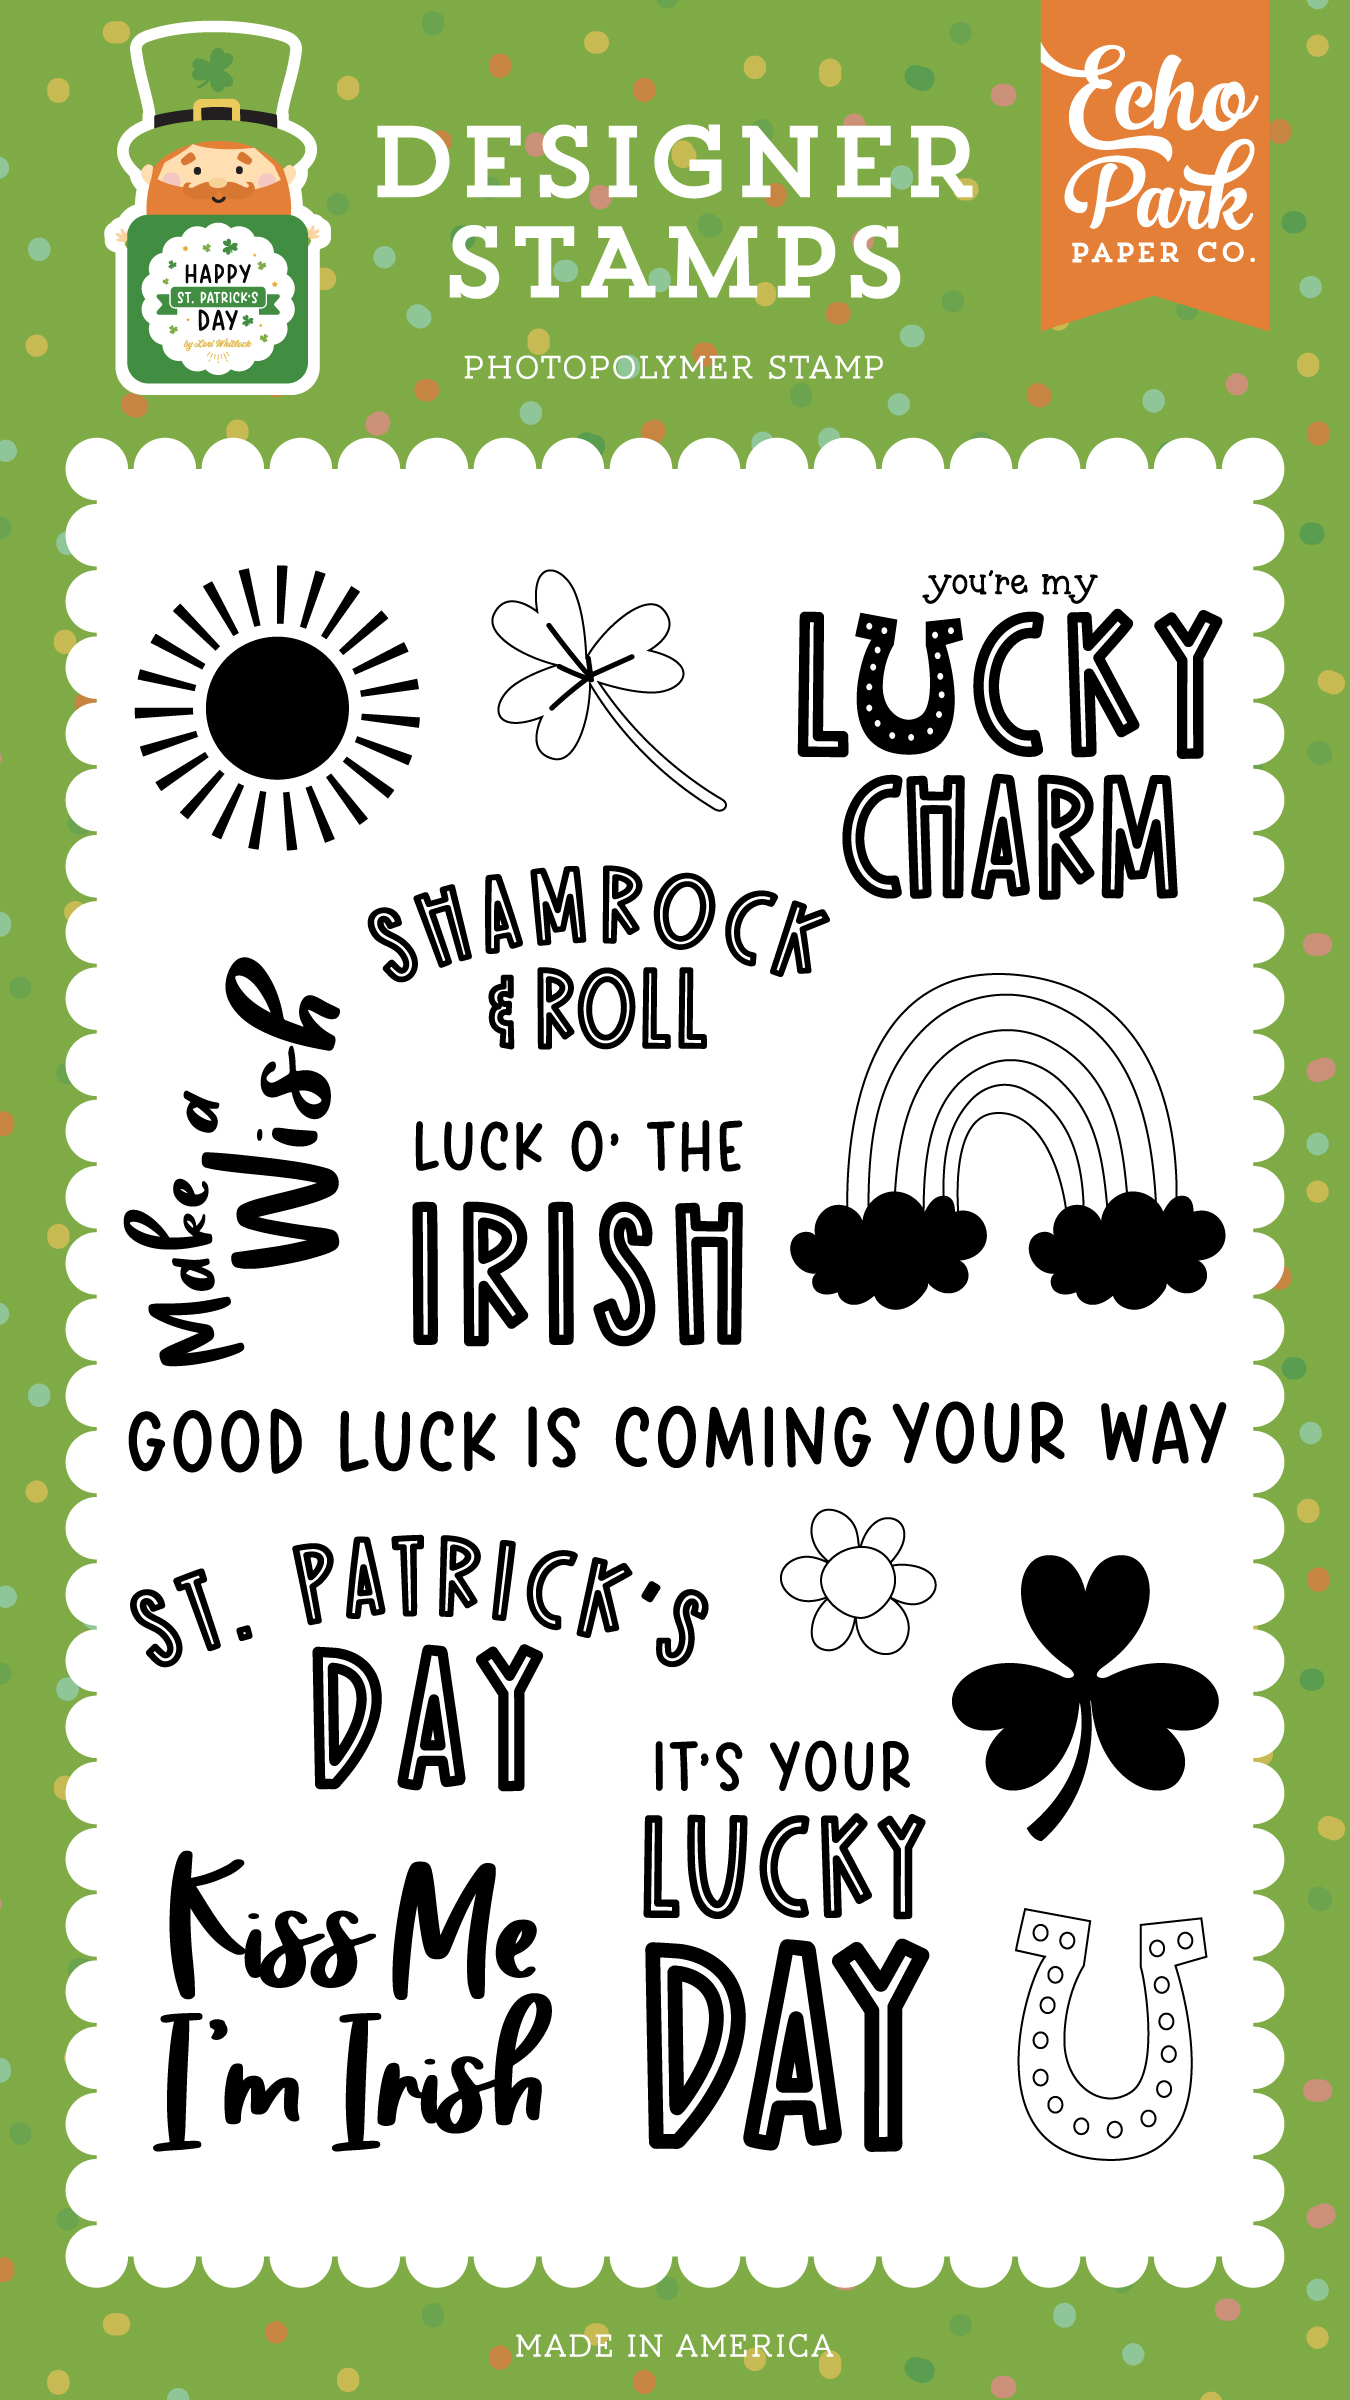 Echo Park Happy St. Patrick’s Day Stamp Good Luck Coming Your Way